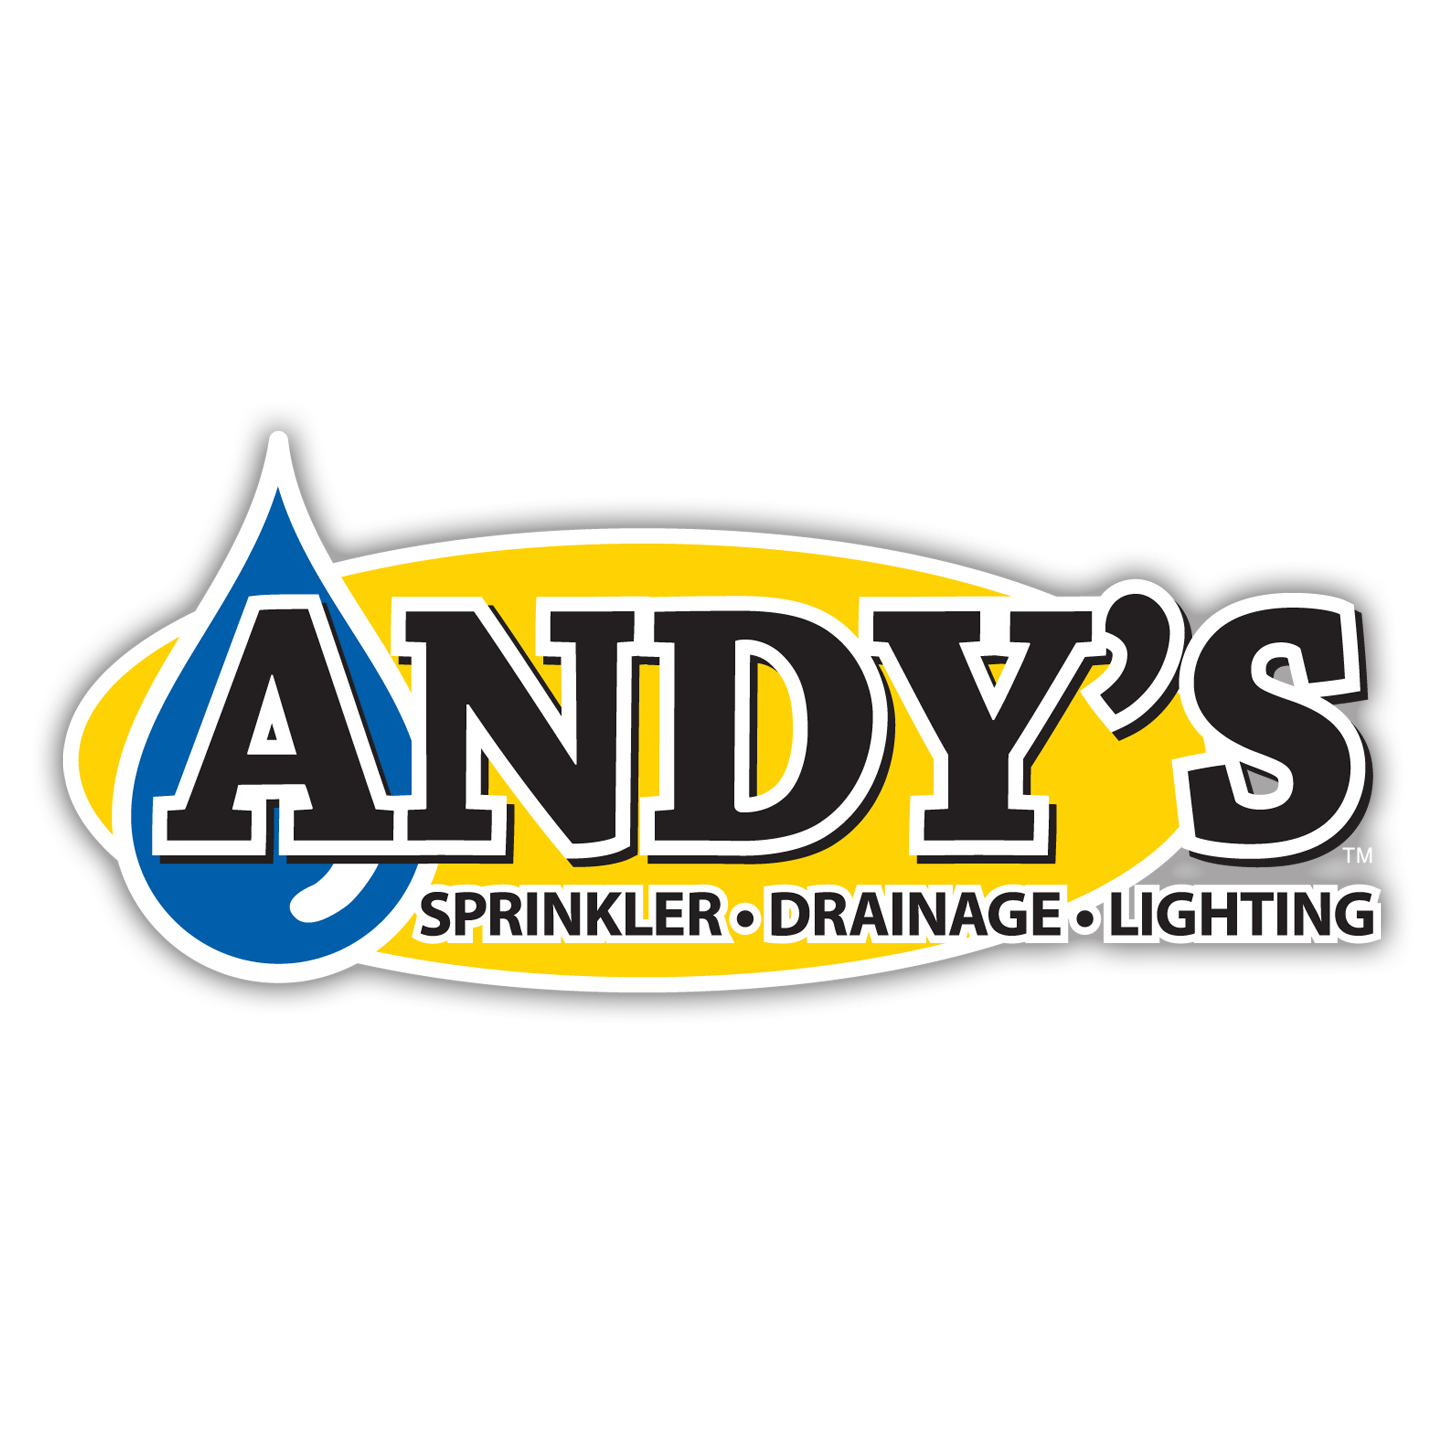 Andy’s Sprinkler, Drainage, and Lighting Jacksonville (844)805-5645